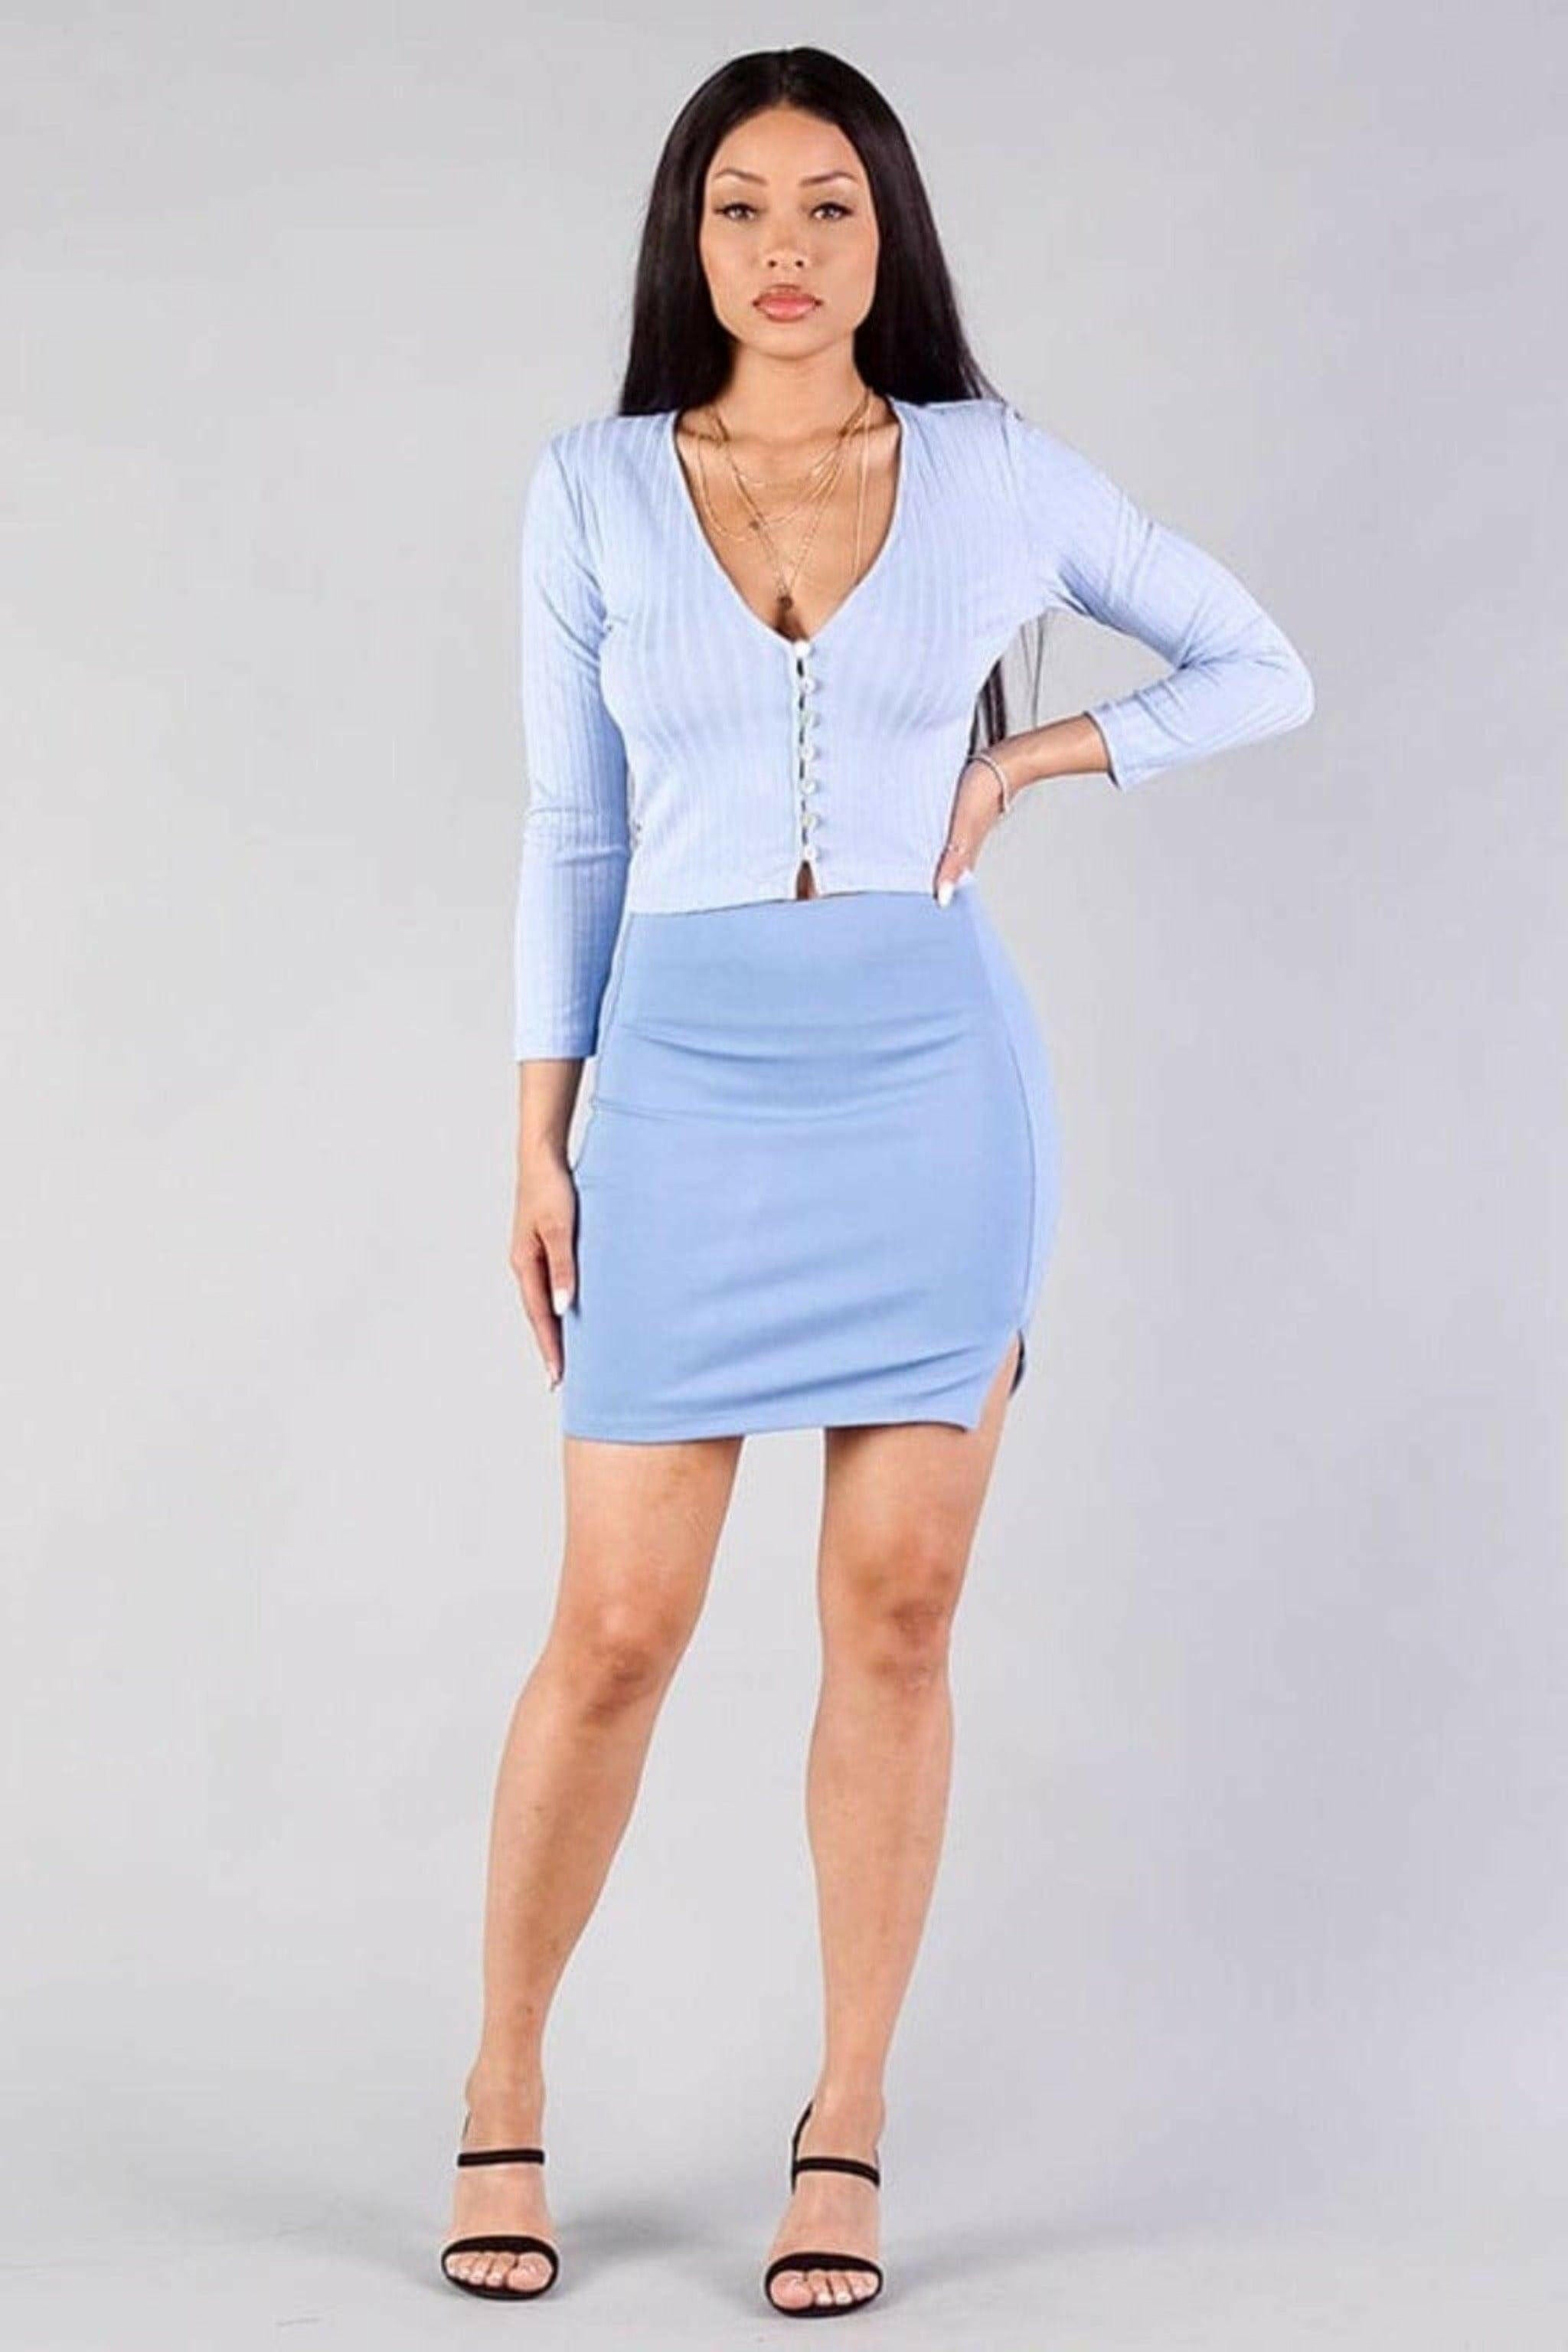 Epicplacess SKIRT SMALL / BLUE / UNITED STATES SPICE UP YOUR DAILY OUTFIT MINI SKIRT S530